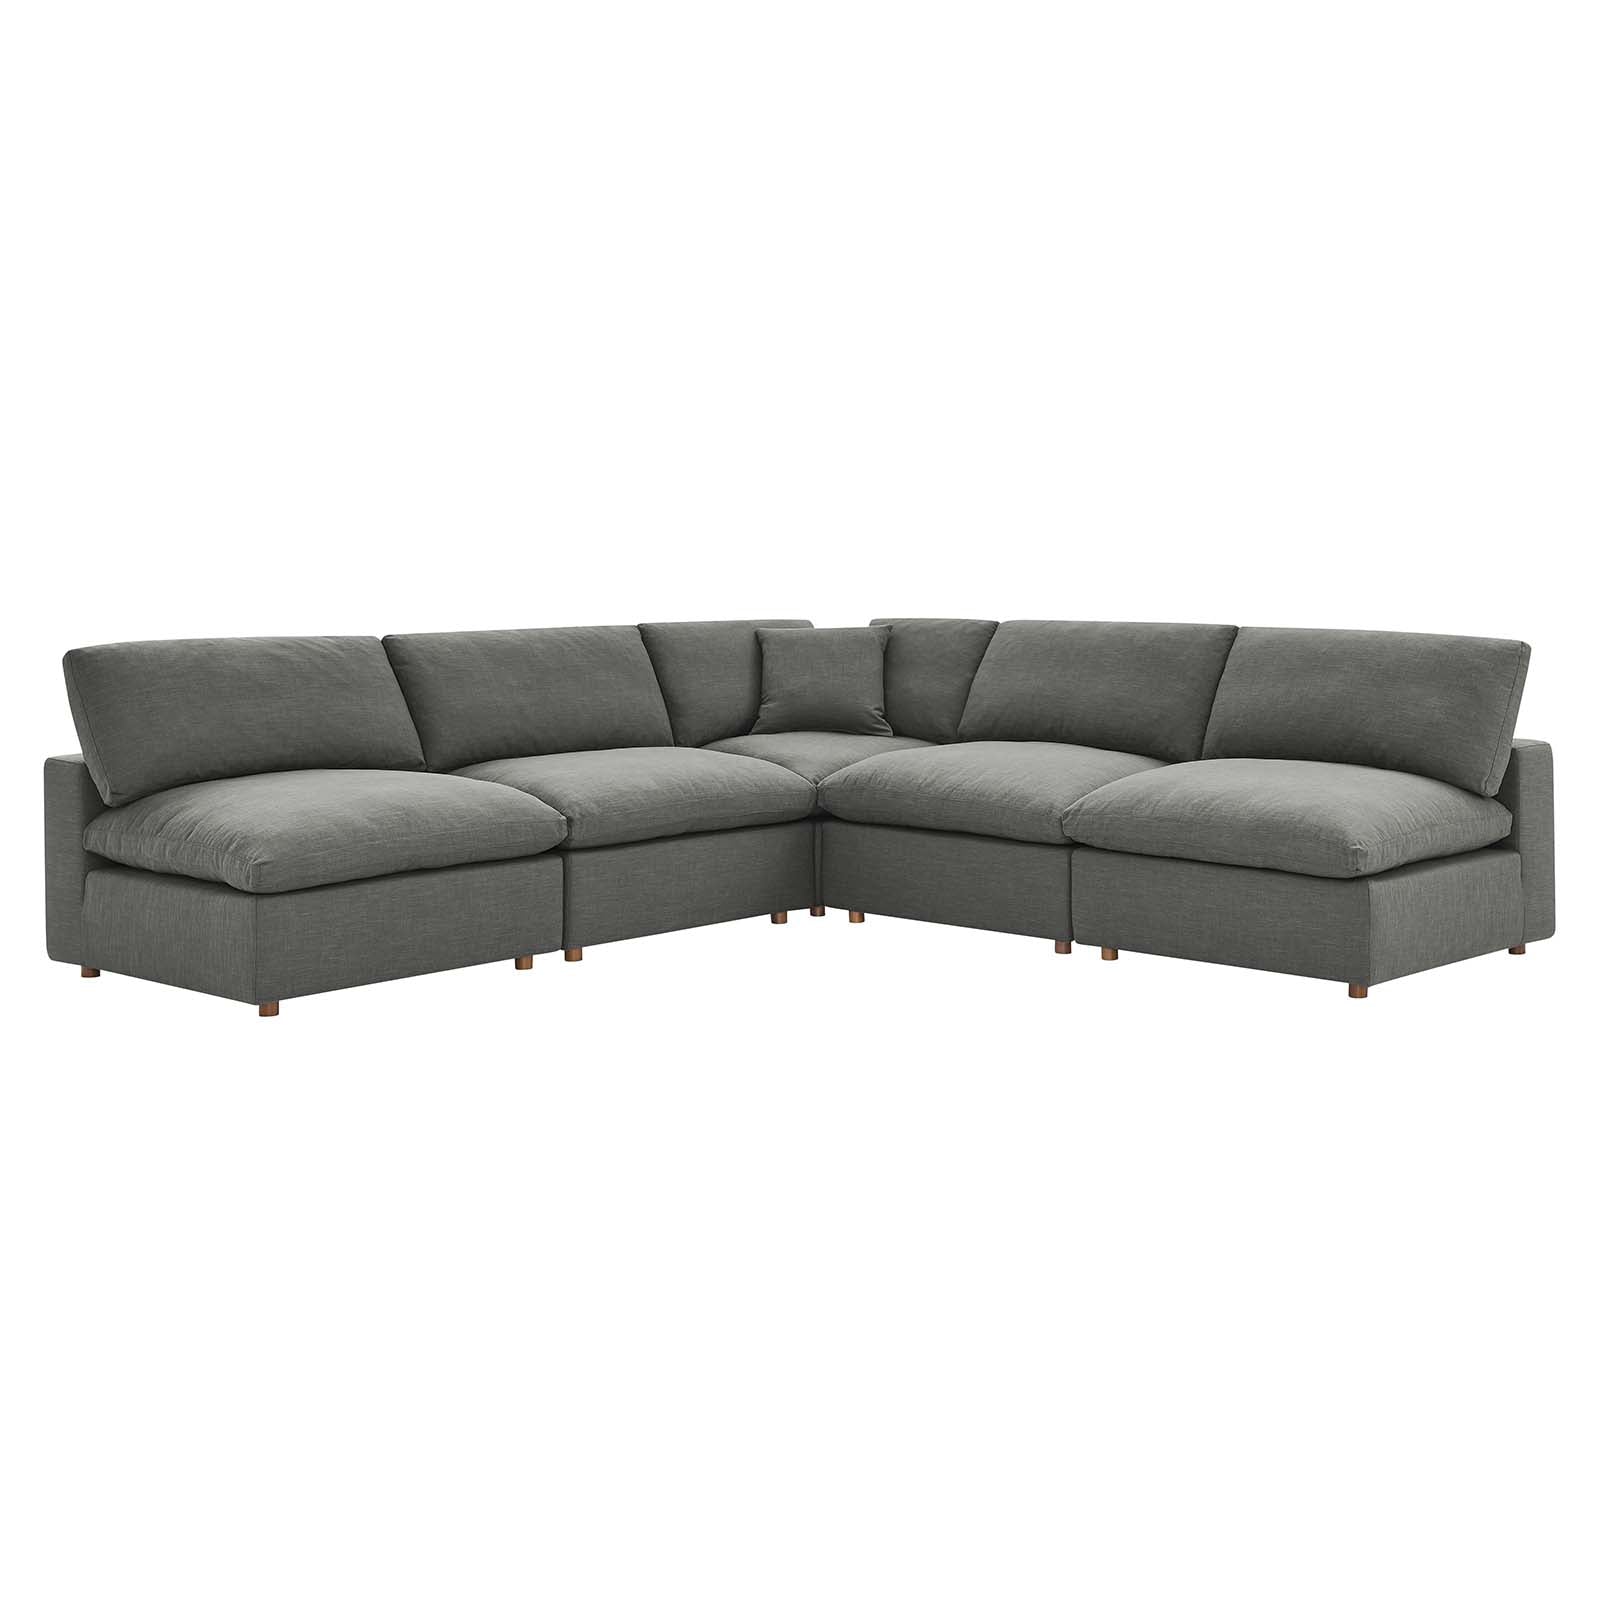 Modway Living Room Sets - Commix Down Filled Overstuffed 5 Piece Sectional Sofa Set Gray